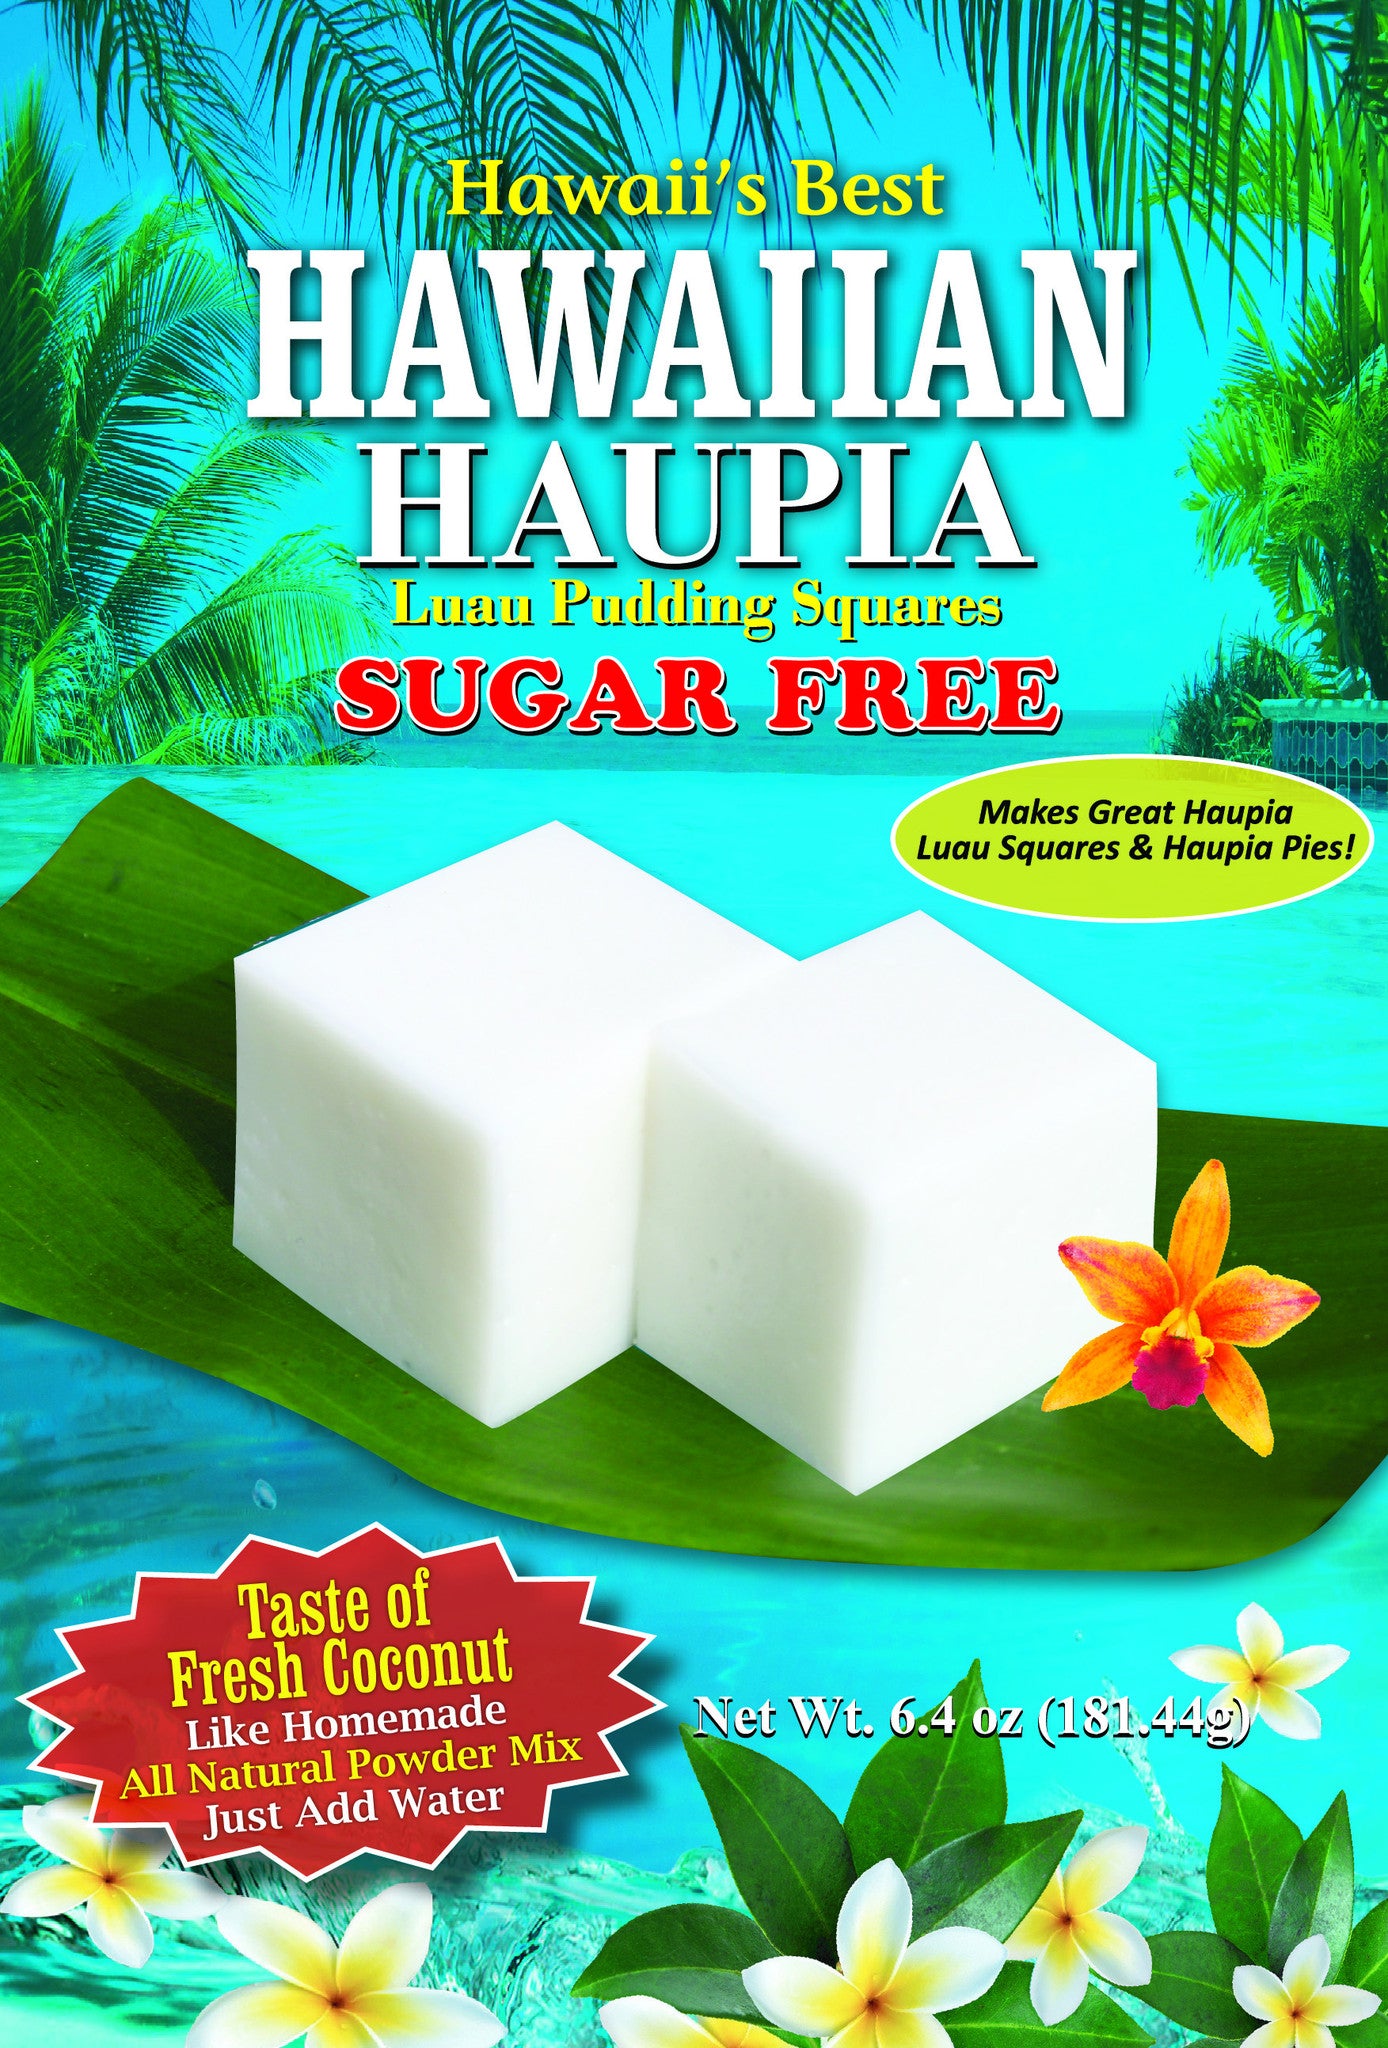 (1 BAG) SUGAR FREE HAUPIA MIX (Coconut Pudding Luau Squares), Made with 100% Xylitol, Gluten Free, Makes 8x8 pan, Just add water!